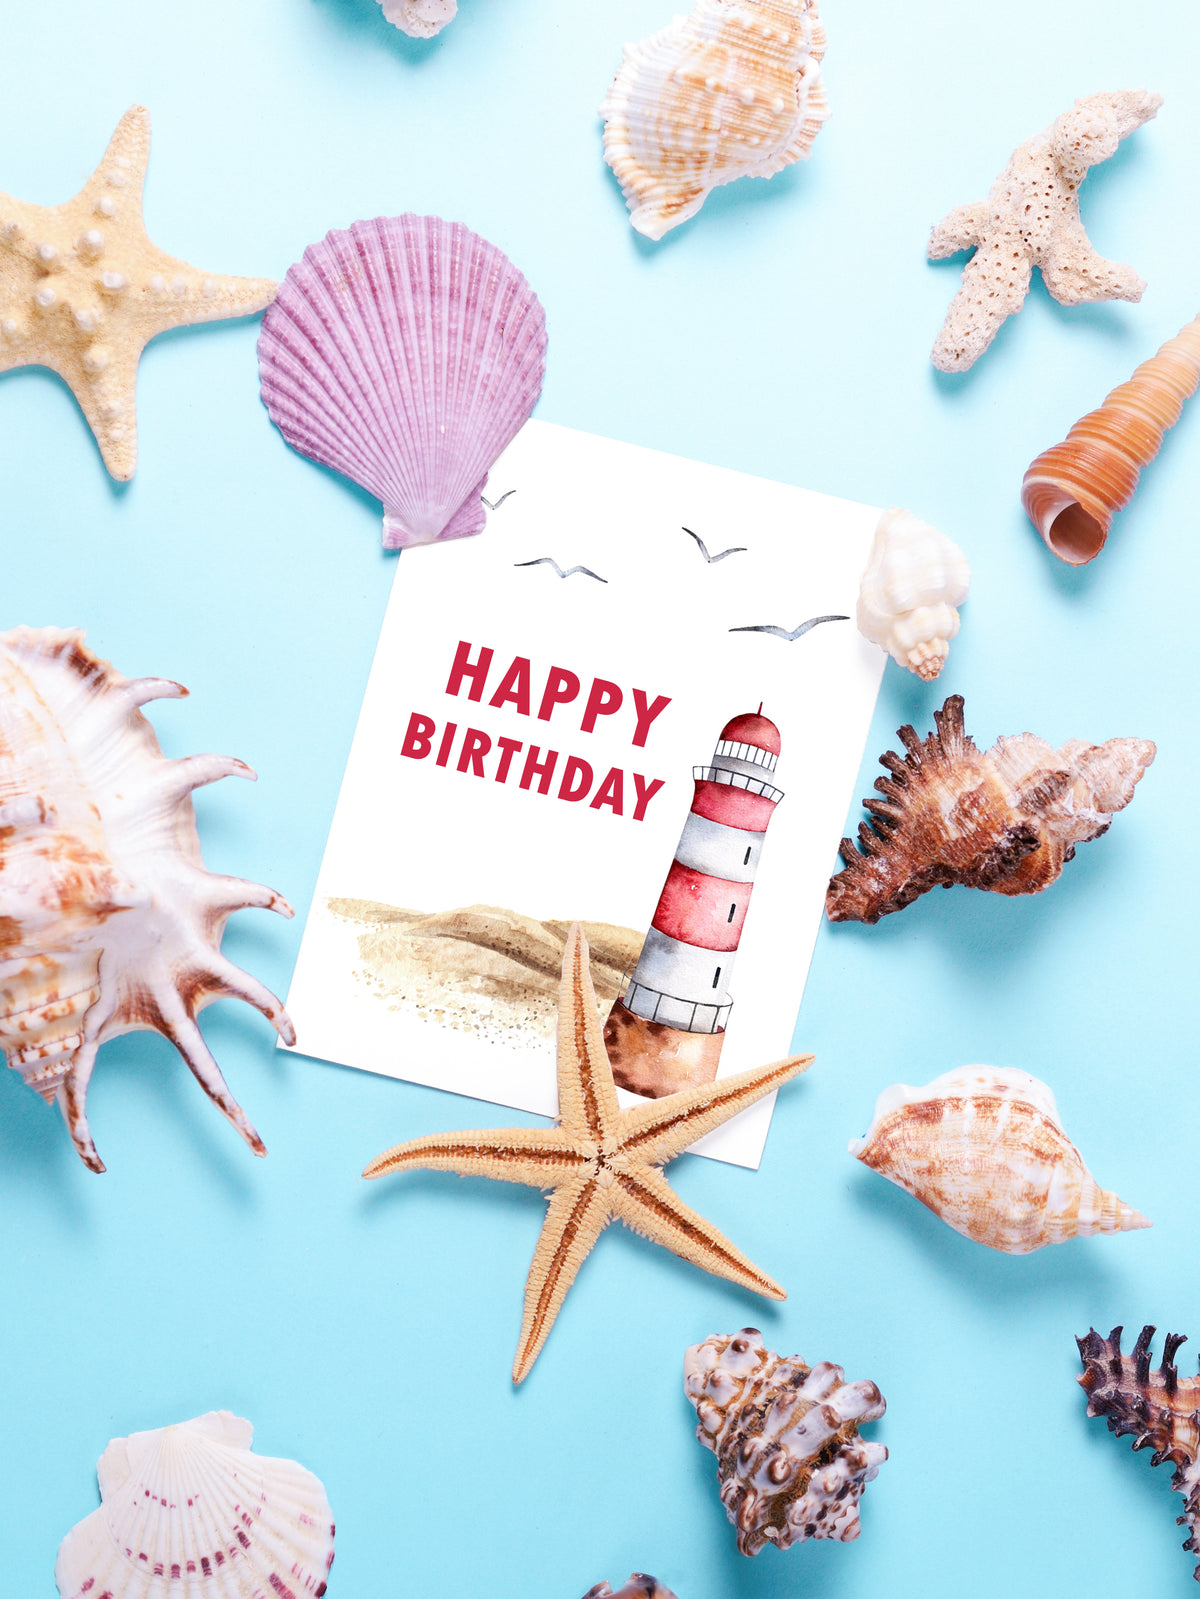 "A picturesque sandy beach with a red and white lighthouse set against a serene coastal backdrop, complemented by a heartfelt Happy Birthday in Red Lettering card design, evoking gratitude and a sense of calm seaside "